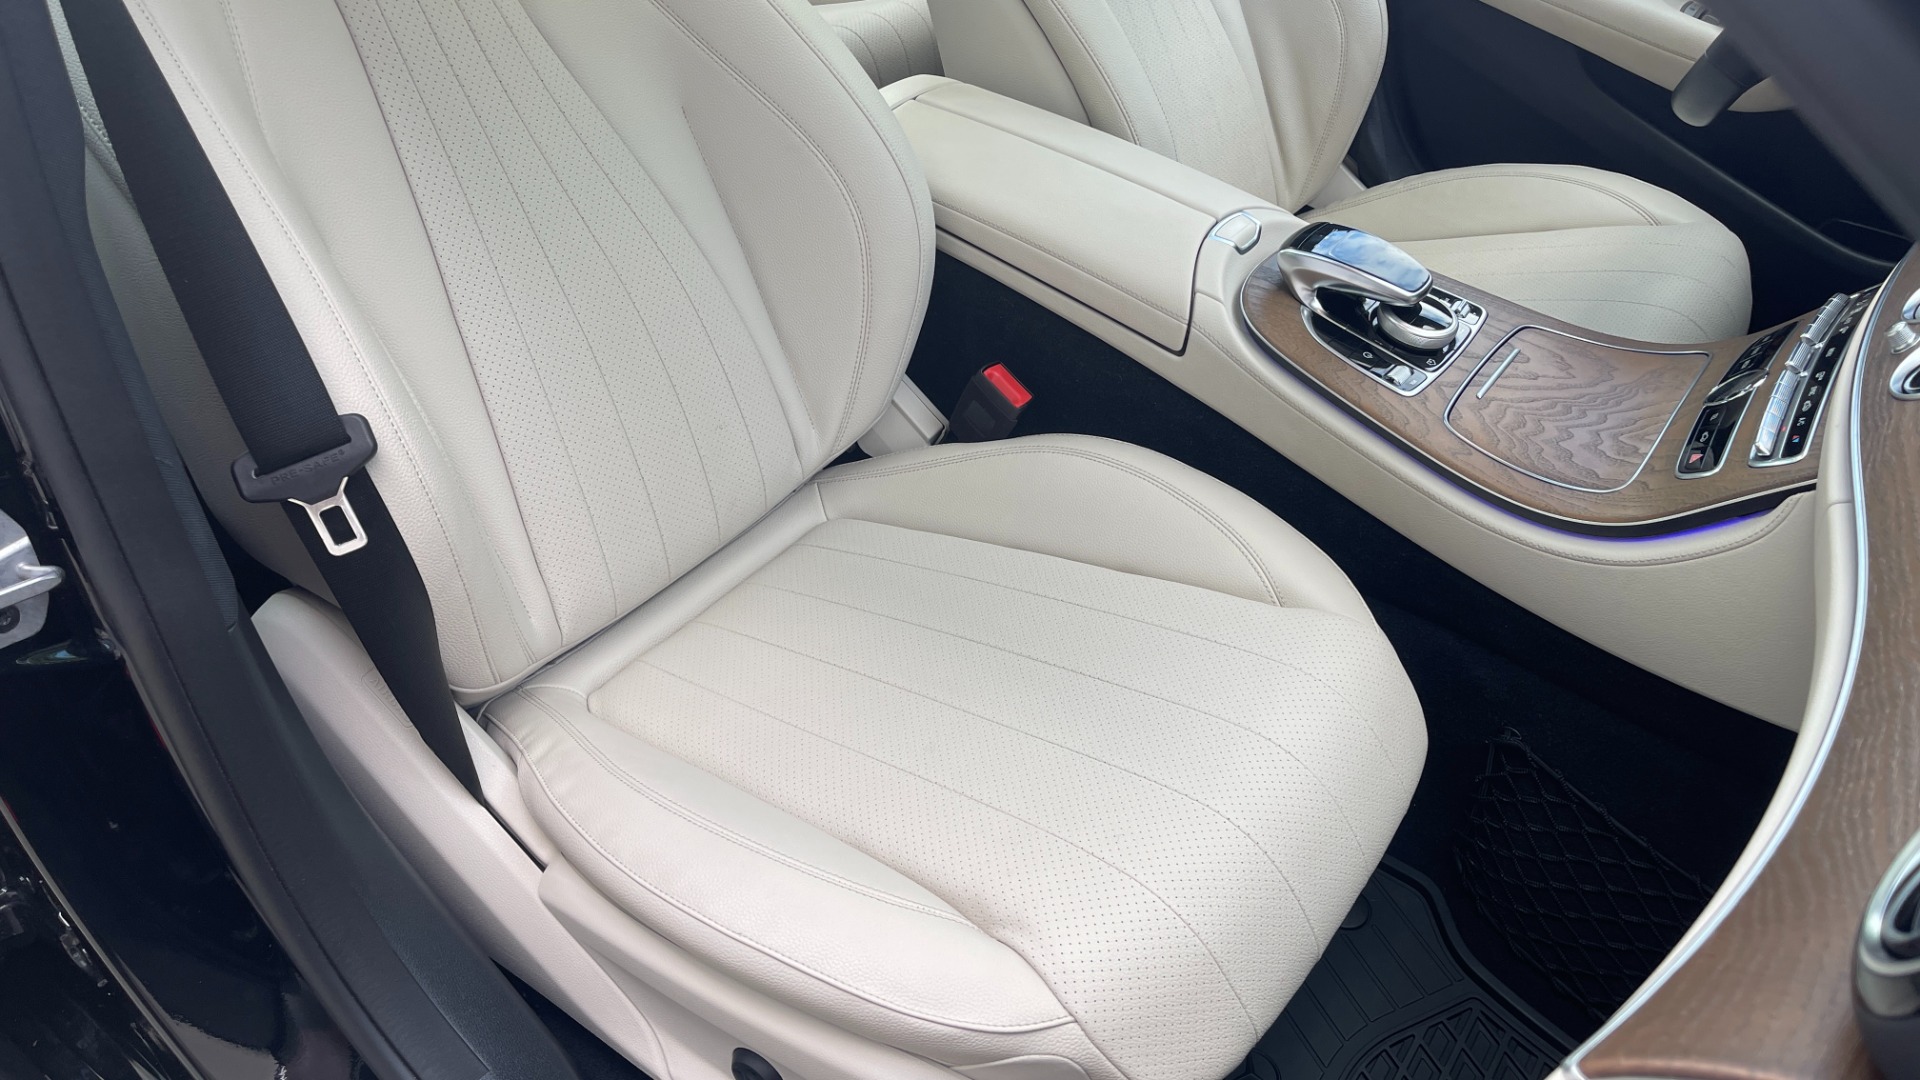 Used 2020 Mercedes-Benz E-Class E 350 / 4MATIC / AMG LINE / BURMESTER SOUND / PANORAMIC ROOF for sale $52,999 at Formula Imports in Charlotte NC 28227 49